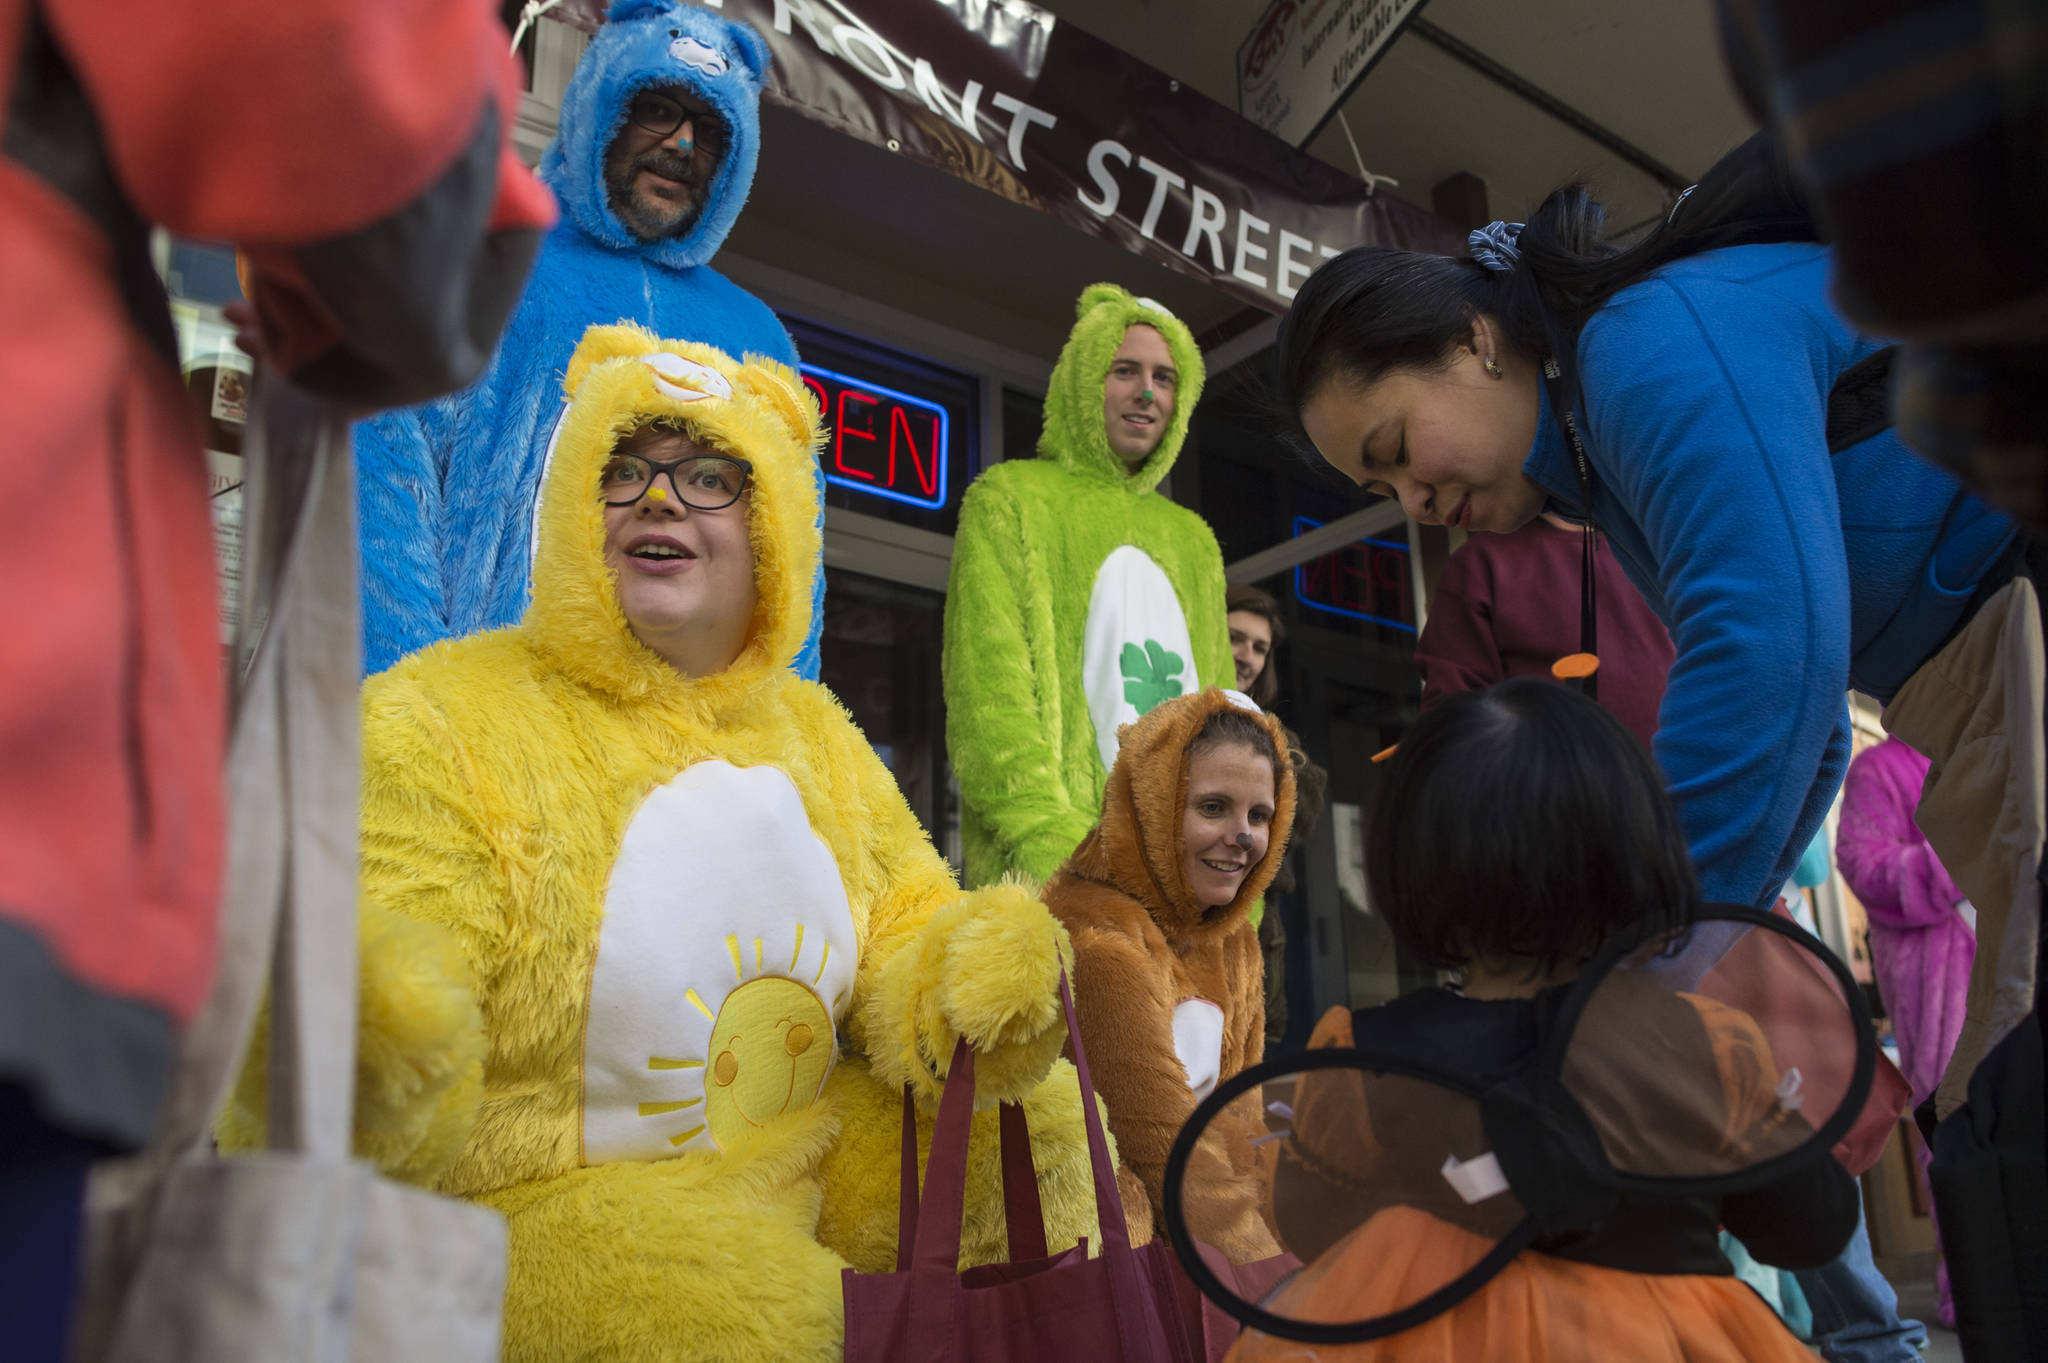 Staff of Front Street Clinic make a colorful group as they hand out candy and school supplies for Halloween on Wednesday, Oct. 31, 2018. For the fourth year Kindred Post has organized the Halloween celebration for trick-or-treaters. (Michael Penn | Juneau Empire)